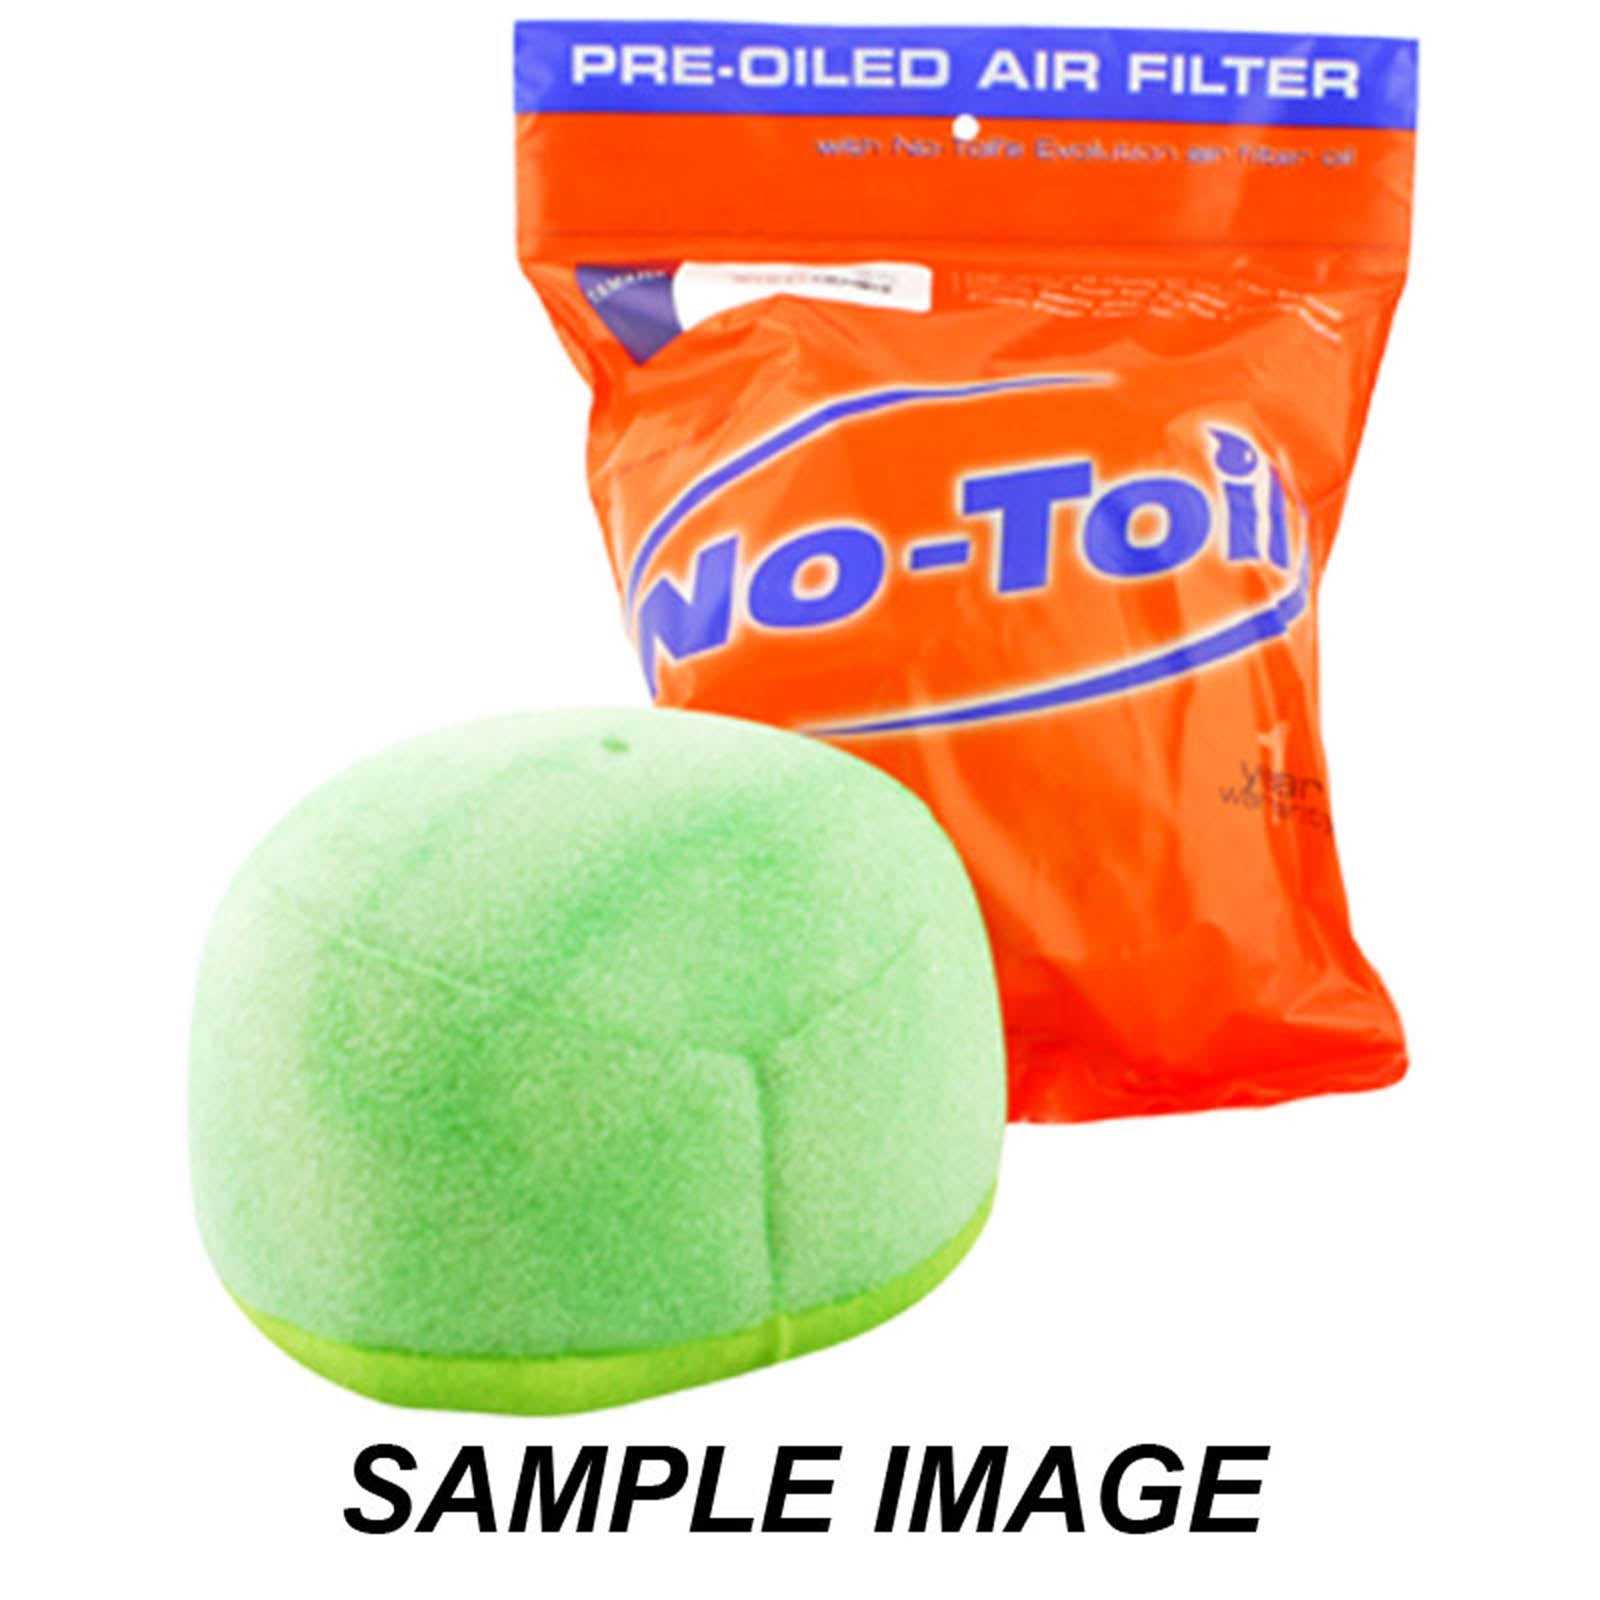 No-Toil, PRE-OILED FILTER KTM 2/4 85-525 04-07 (Not 07 SX) 3 Pin